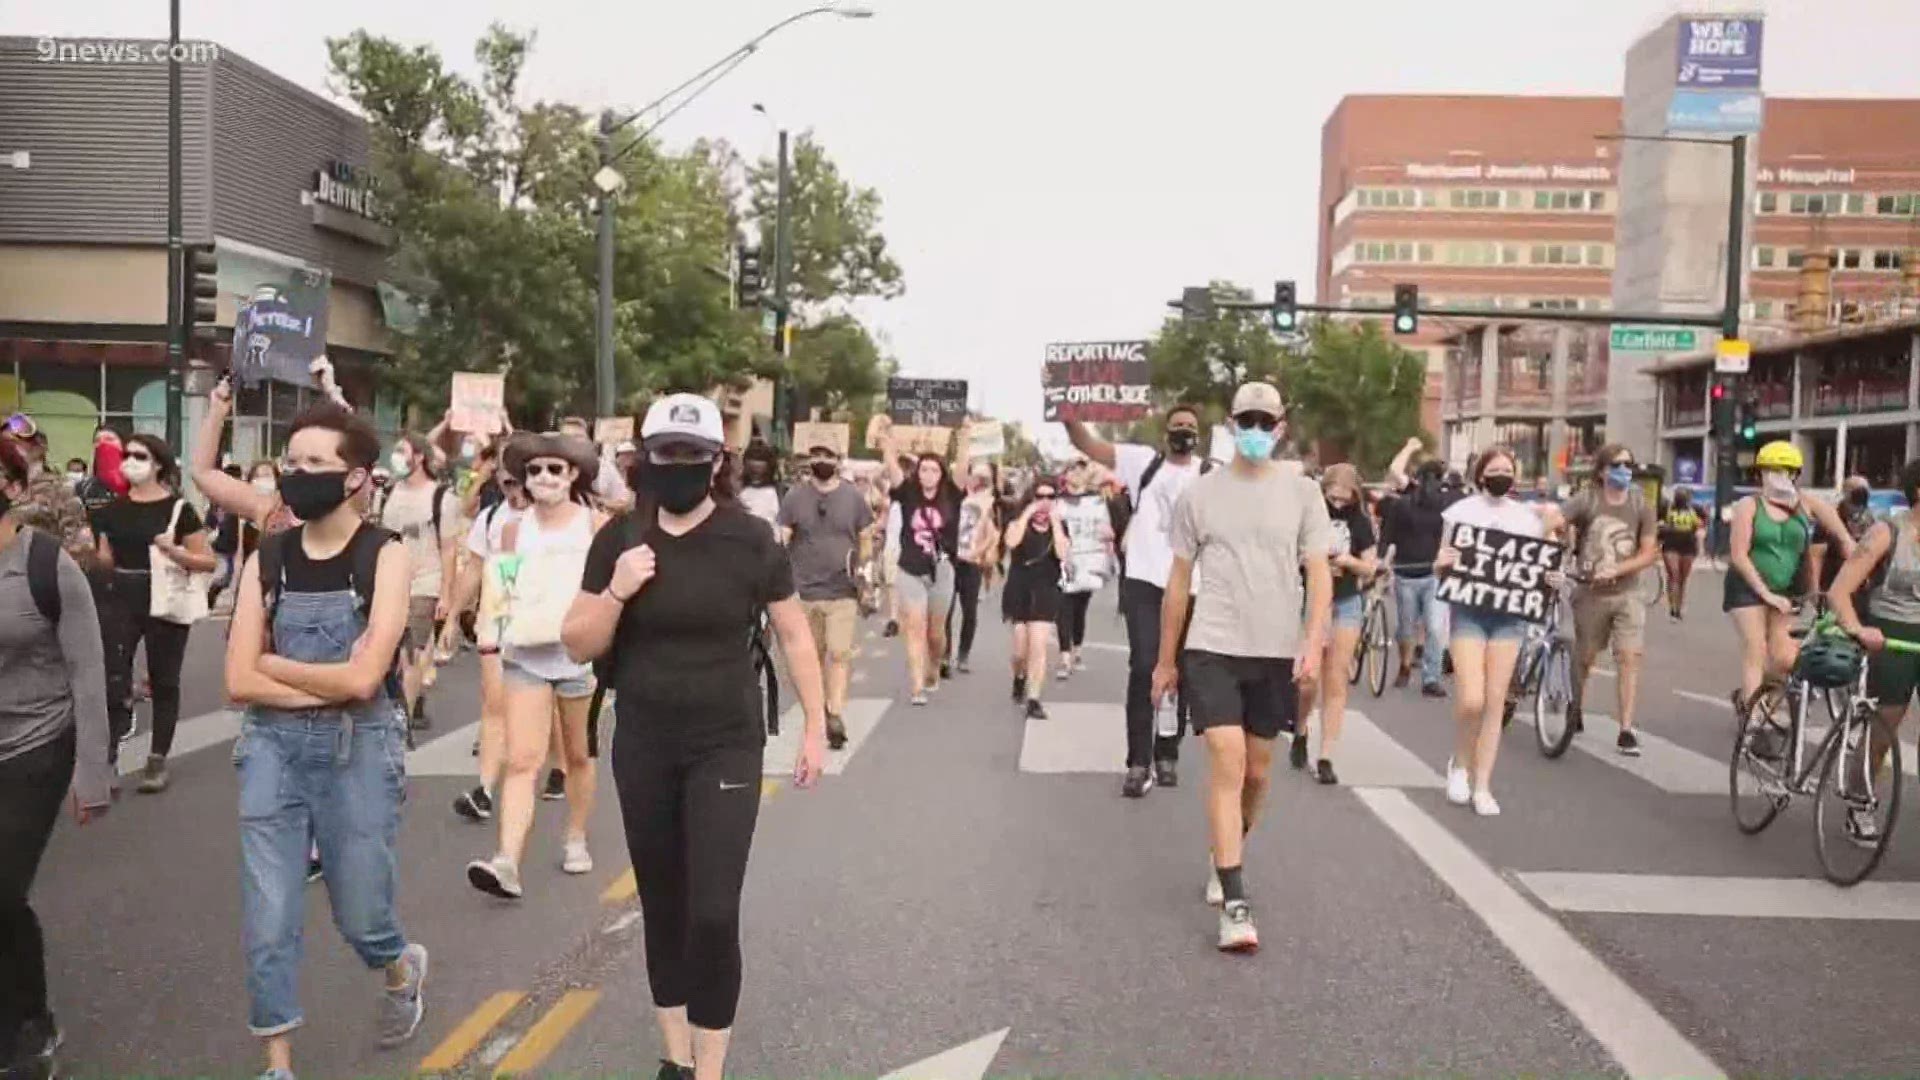 The marchers moved west on Colfax Avenue from the Martin Luther King Jr. Library in Aurora to City Park in Denver.